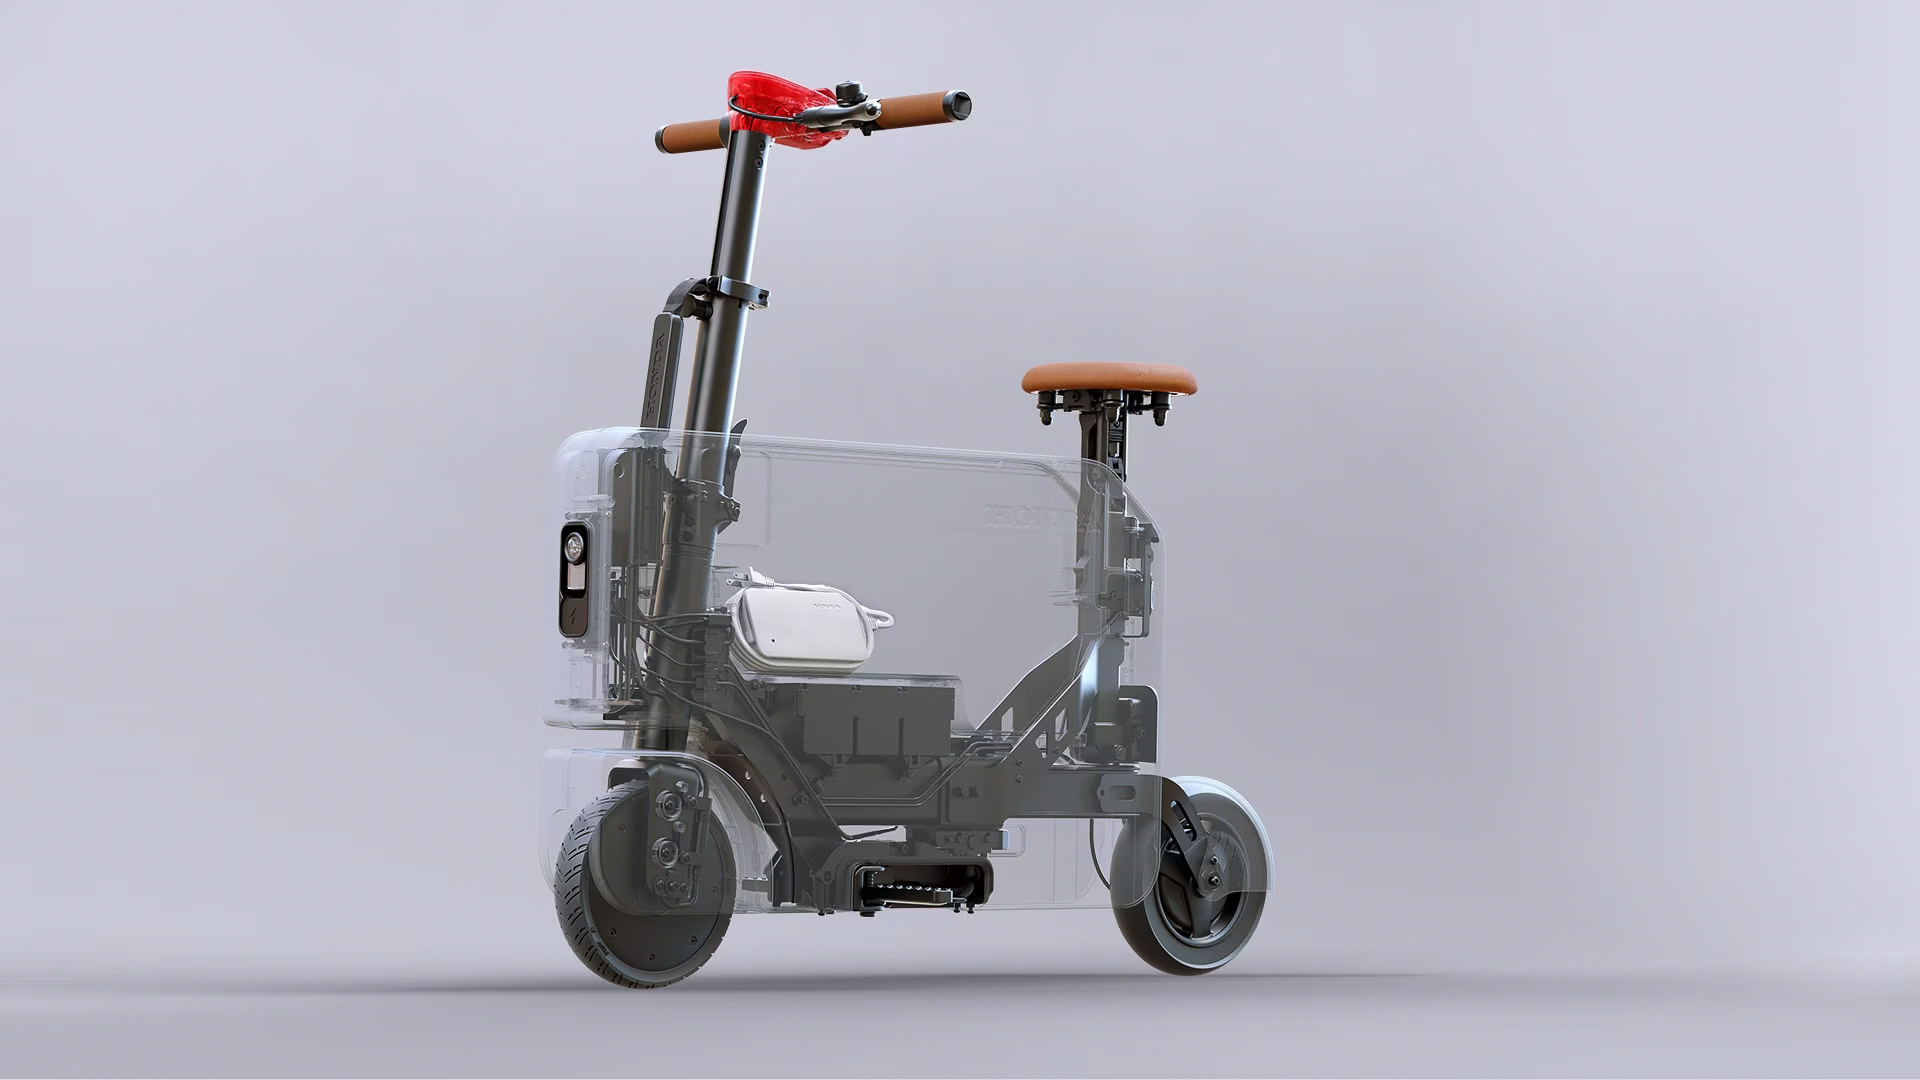 Image showcasing the side profile x-ray of the Honda Motocompacto electric scooter